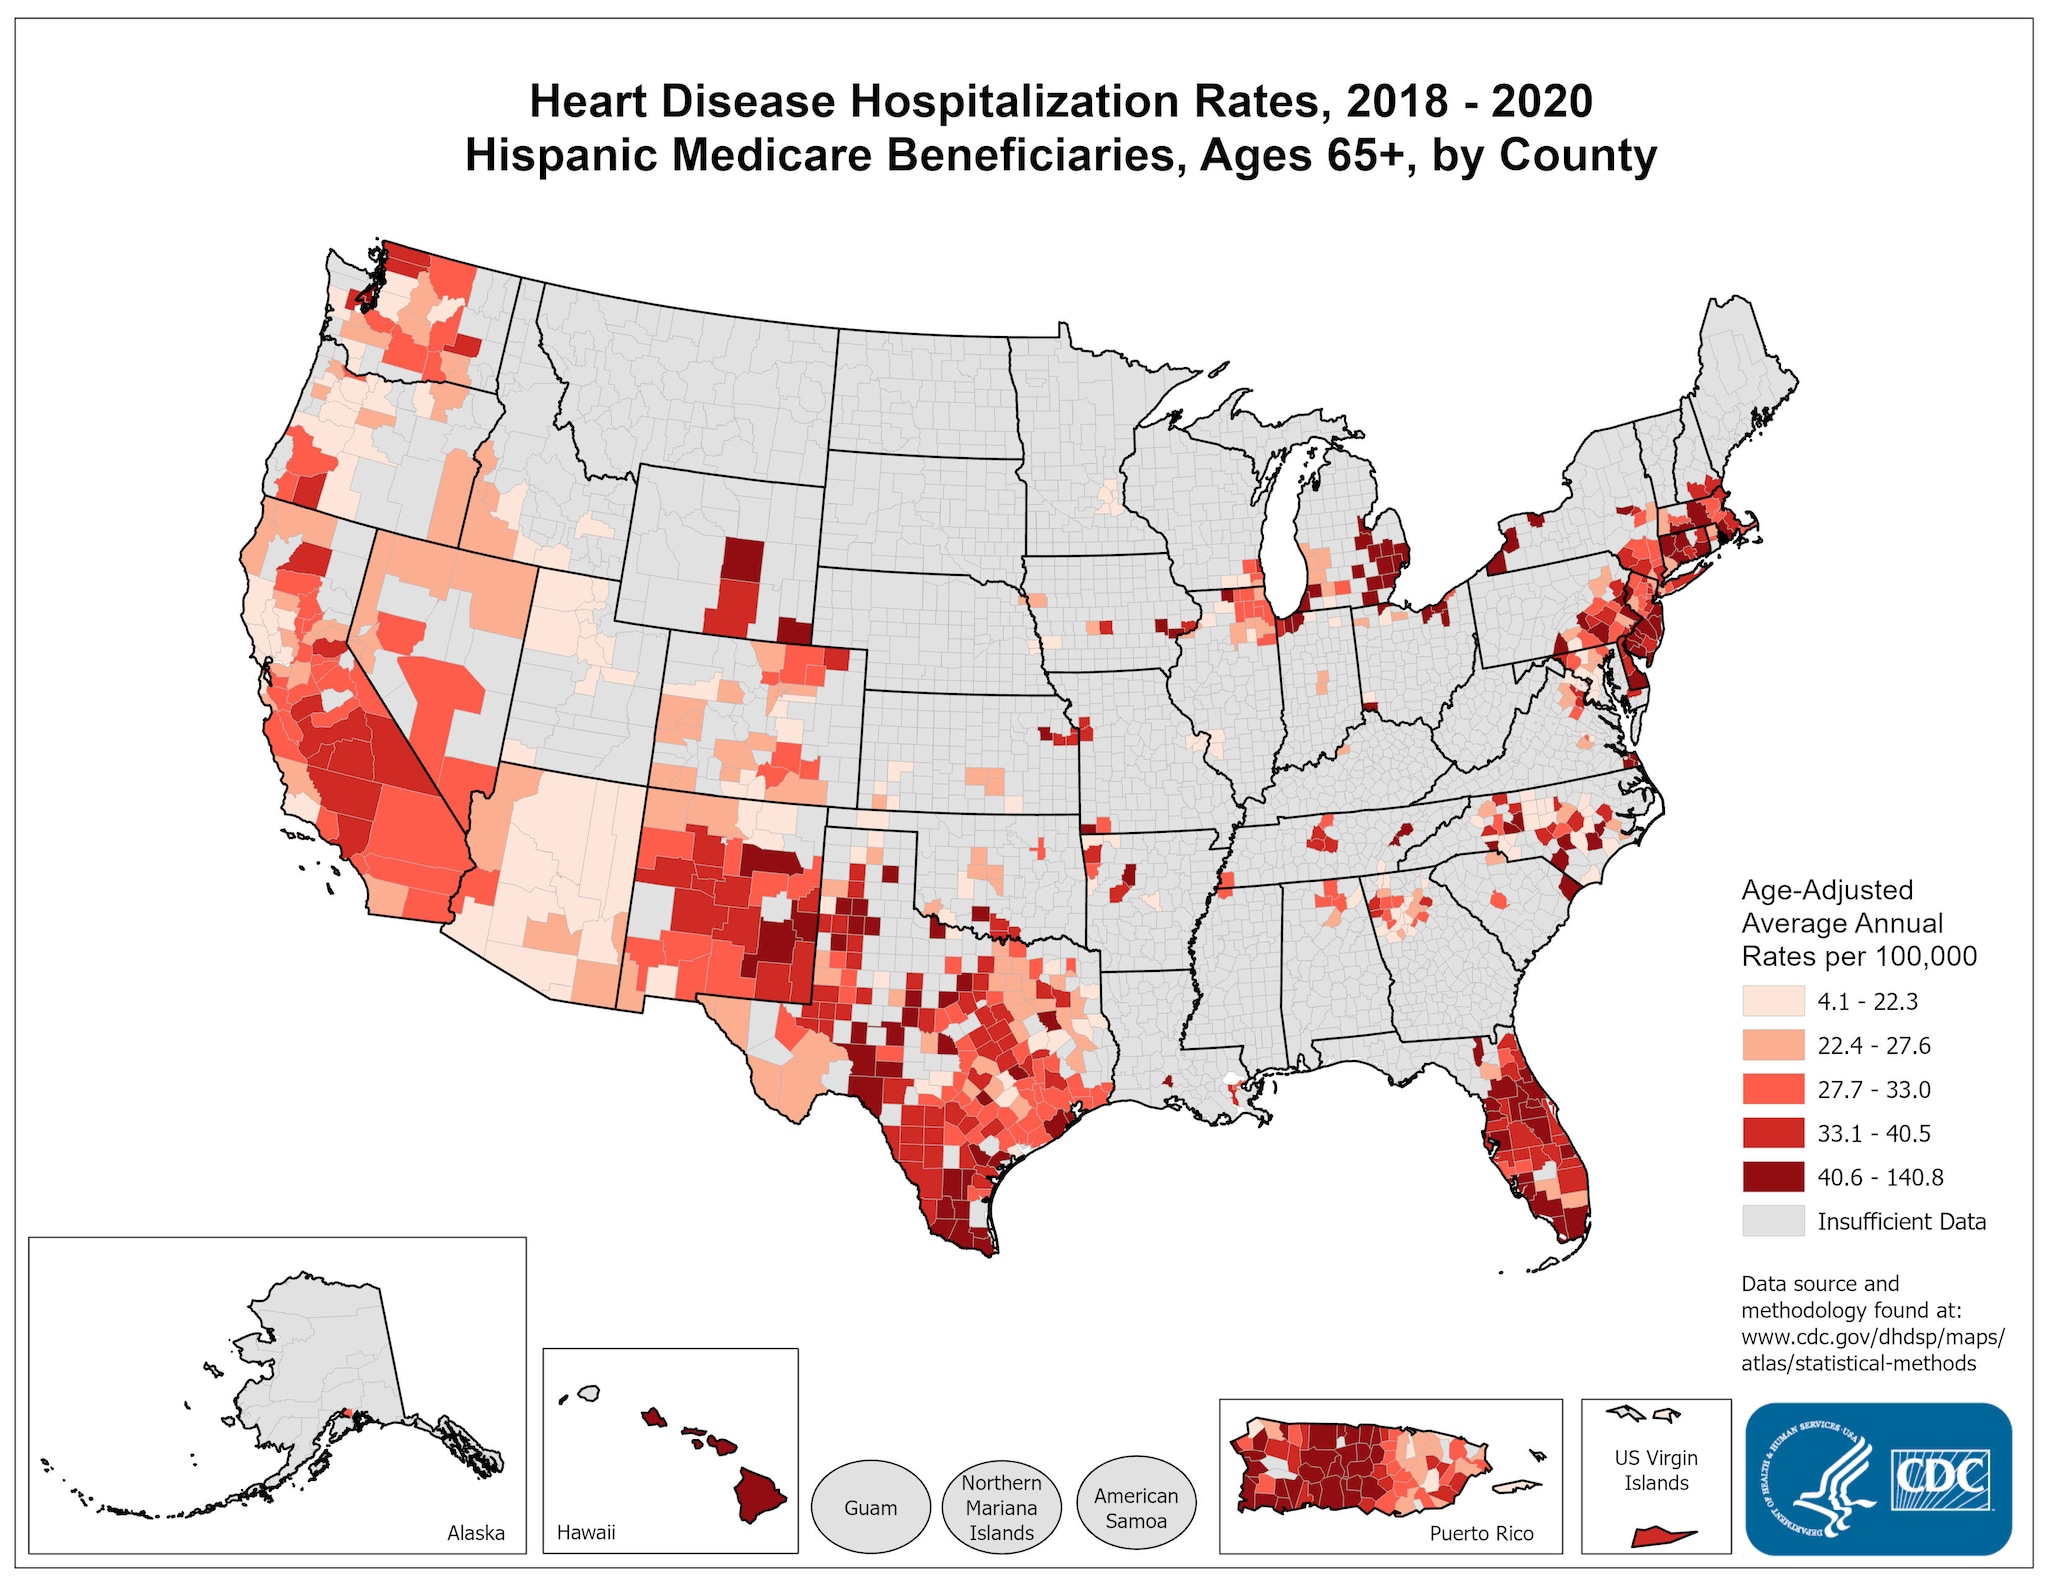 Heart Disease Hospitalization Rates for 2018 through 2020 for Hispanics Aged 65 Years and Older by County